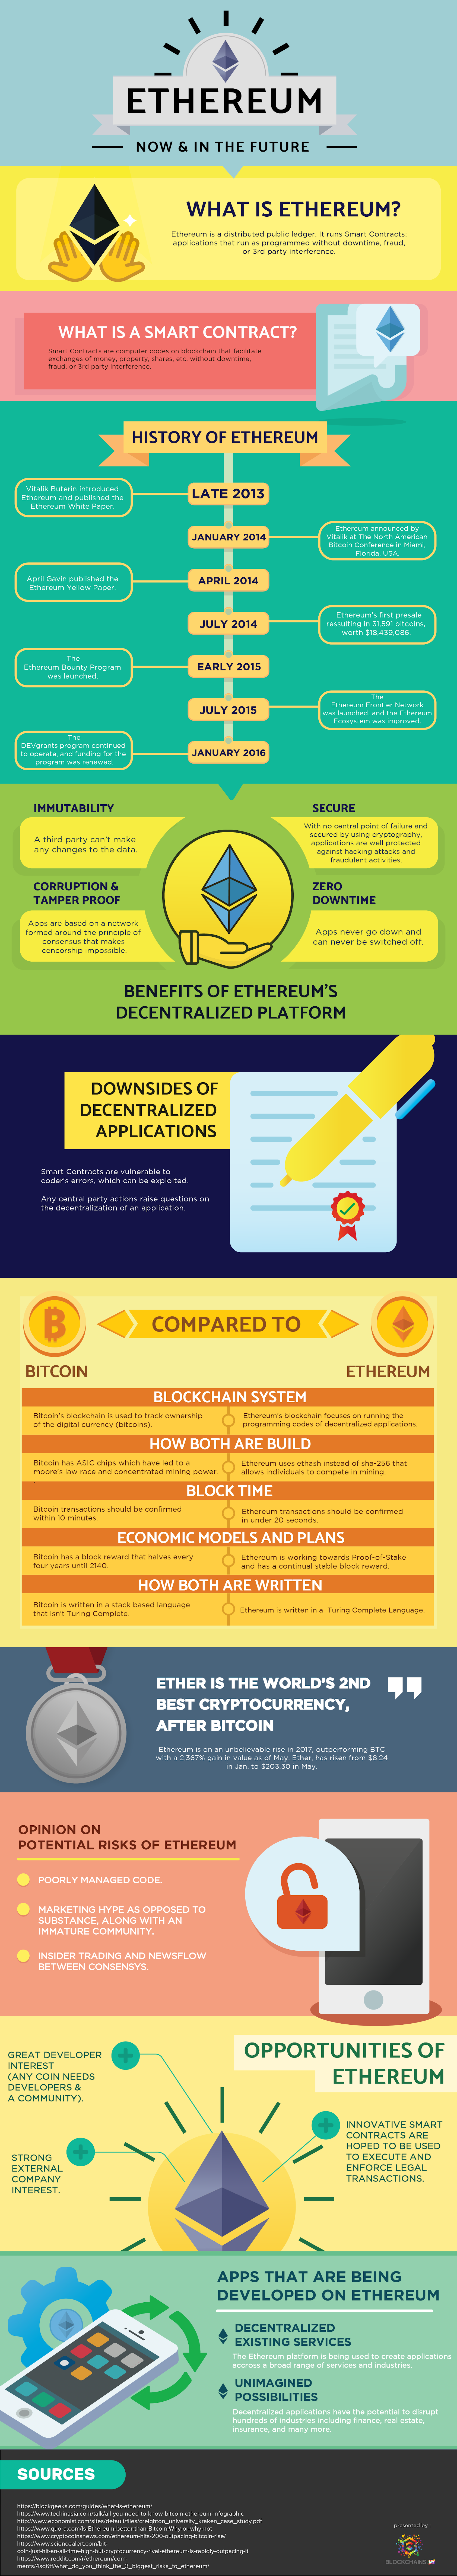 Ethereum Now & In the Future - #Infographic